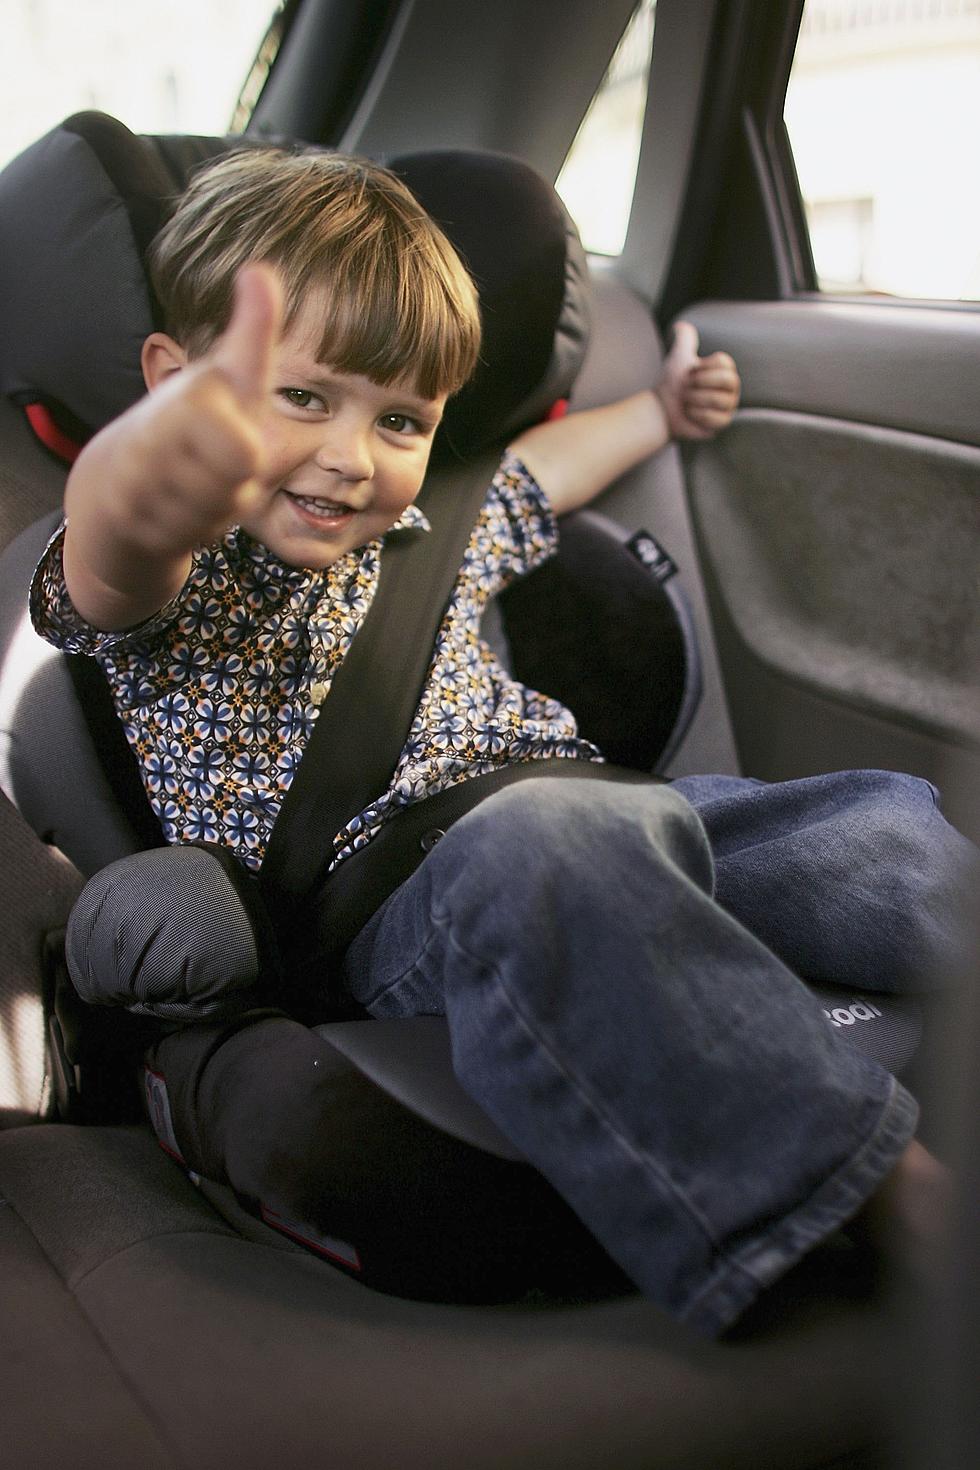 10 Year Old Texas Boy Creates Device to Save Children in Hot Cars